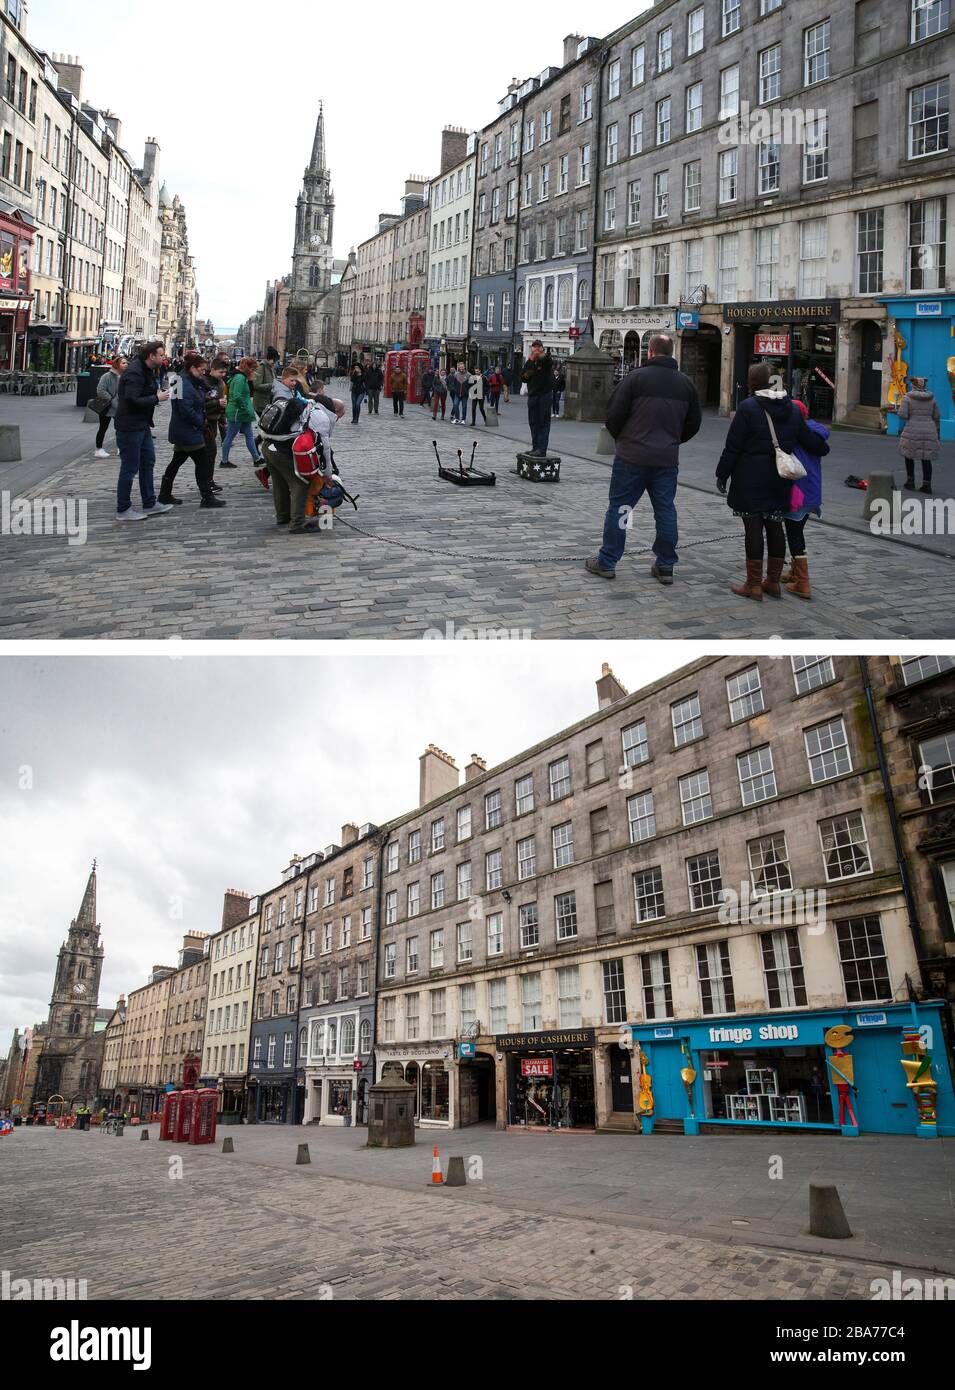 Composite photos of Edinburgh's Royal Mile on 14/03/20, and on Saturday (21/03/20) after bars, pubs and restaurants were instructed to close. Prime Minister Boris Johnson put the UK in lockdown on Monday night to help curb the spread of the coronavirus. Stock Photo